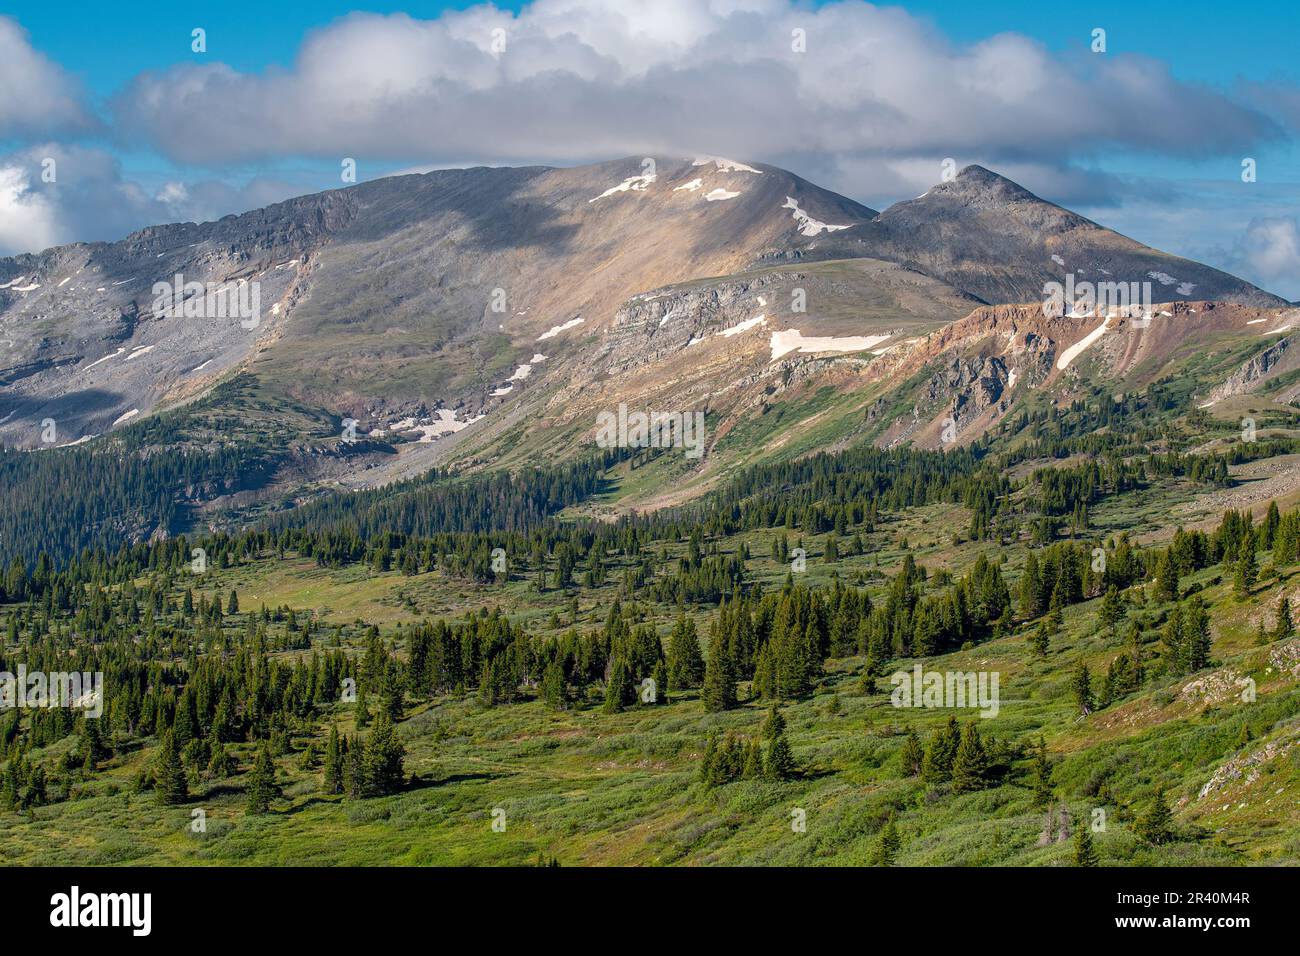 Beautiful early morning view of the Sawatch Mountain Range of Colorado from Cottonwood Pass. Stock Photo